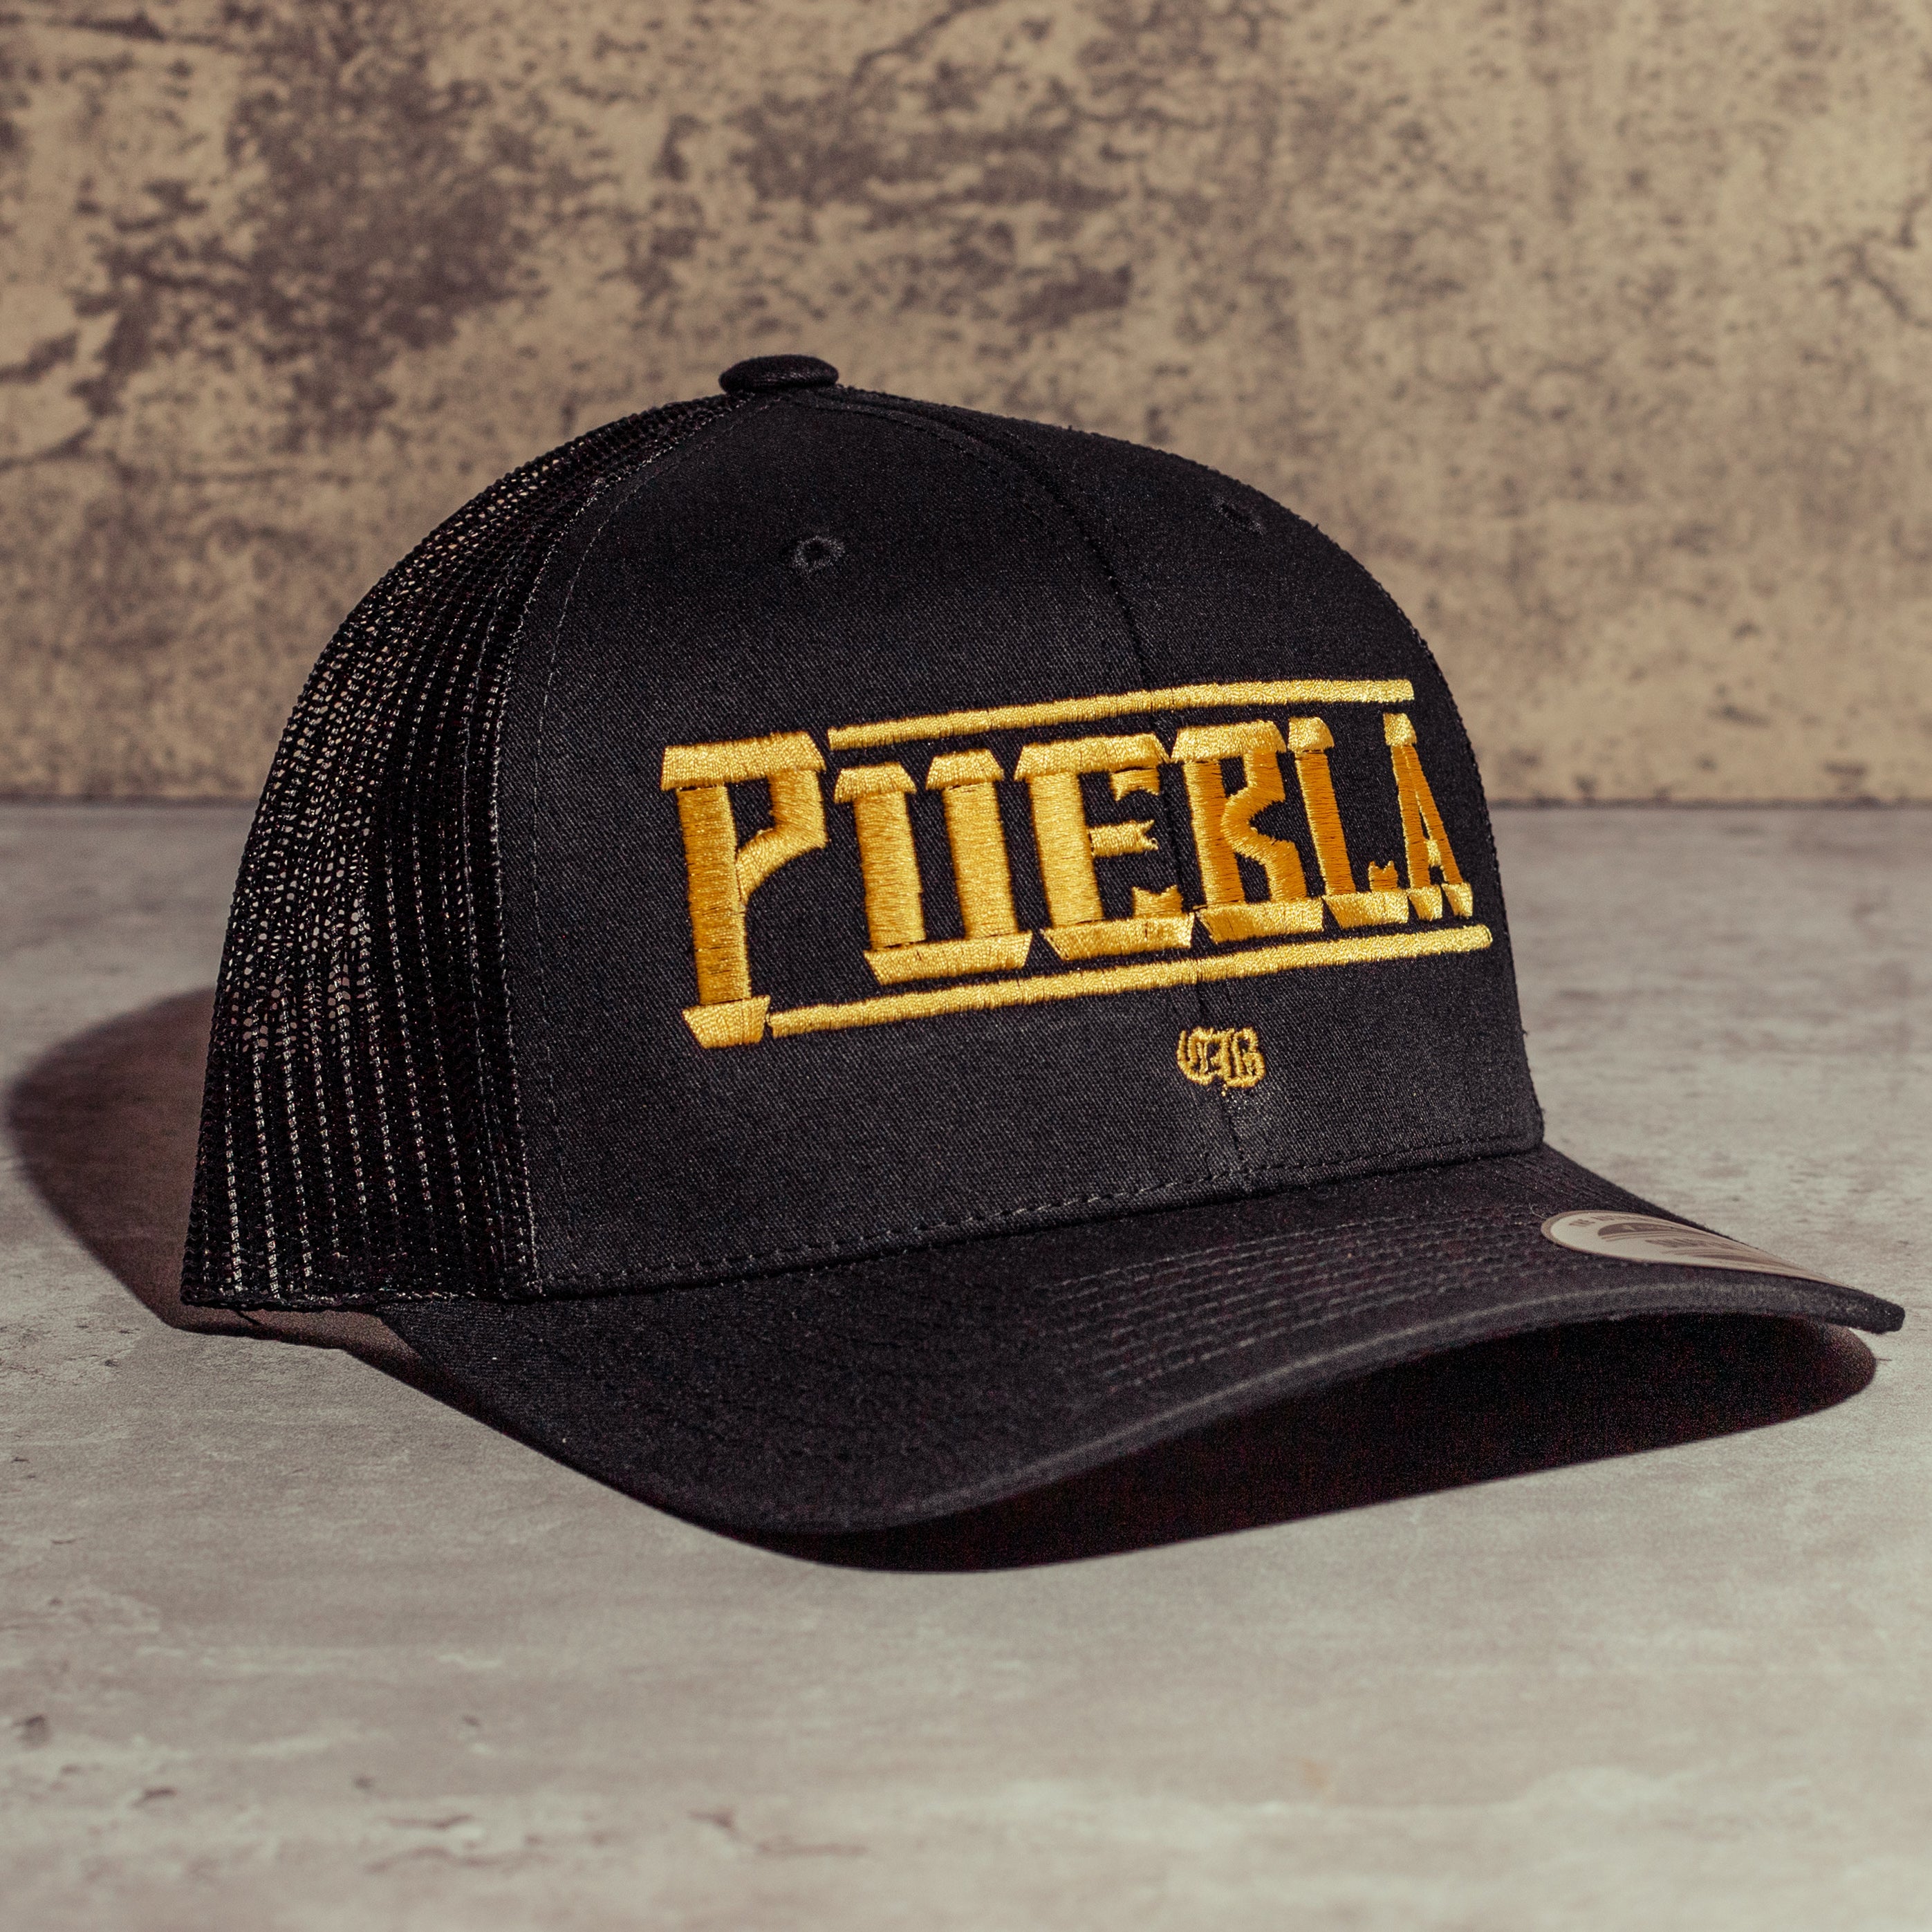 Pit Bull West Coast Snap Back Cheapest Order